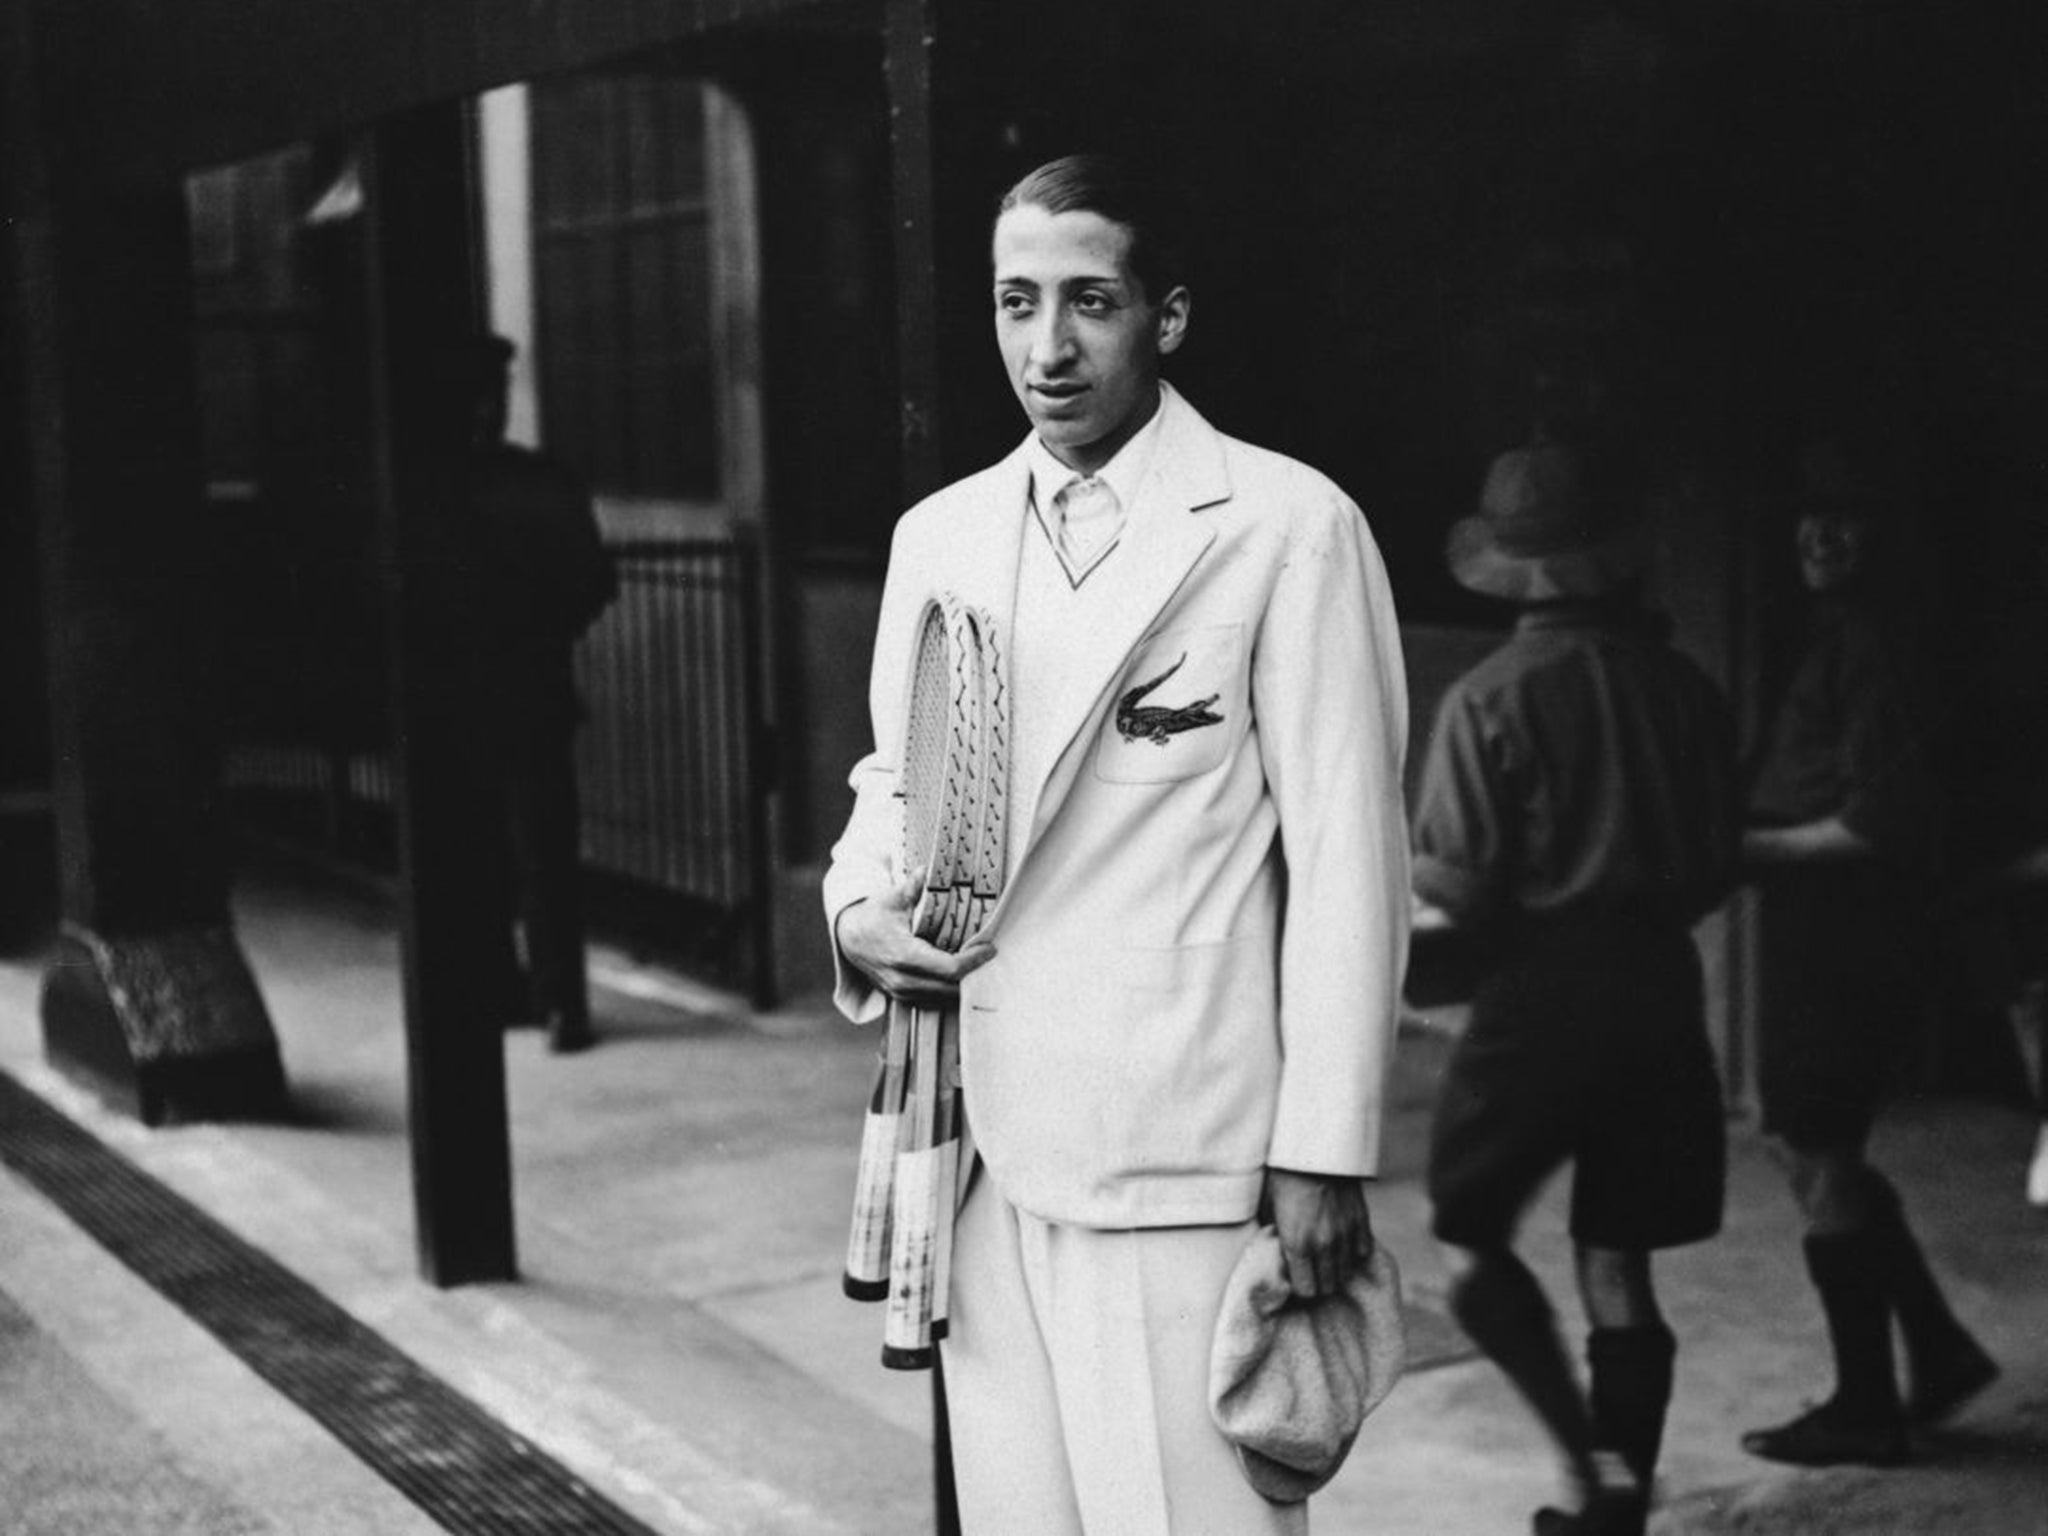 René Lacoste wearing his embroidered crocodile motif